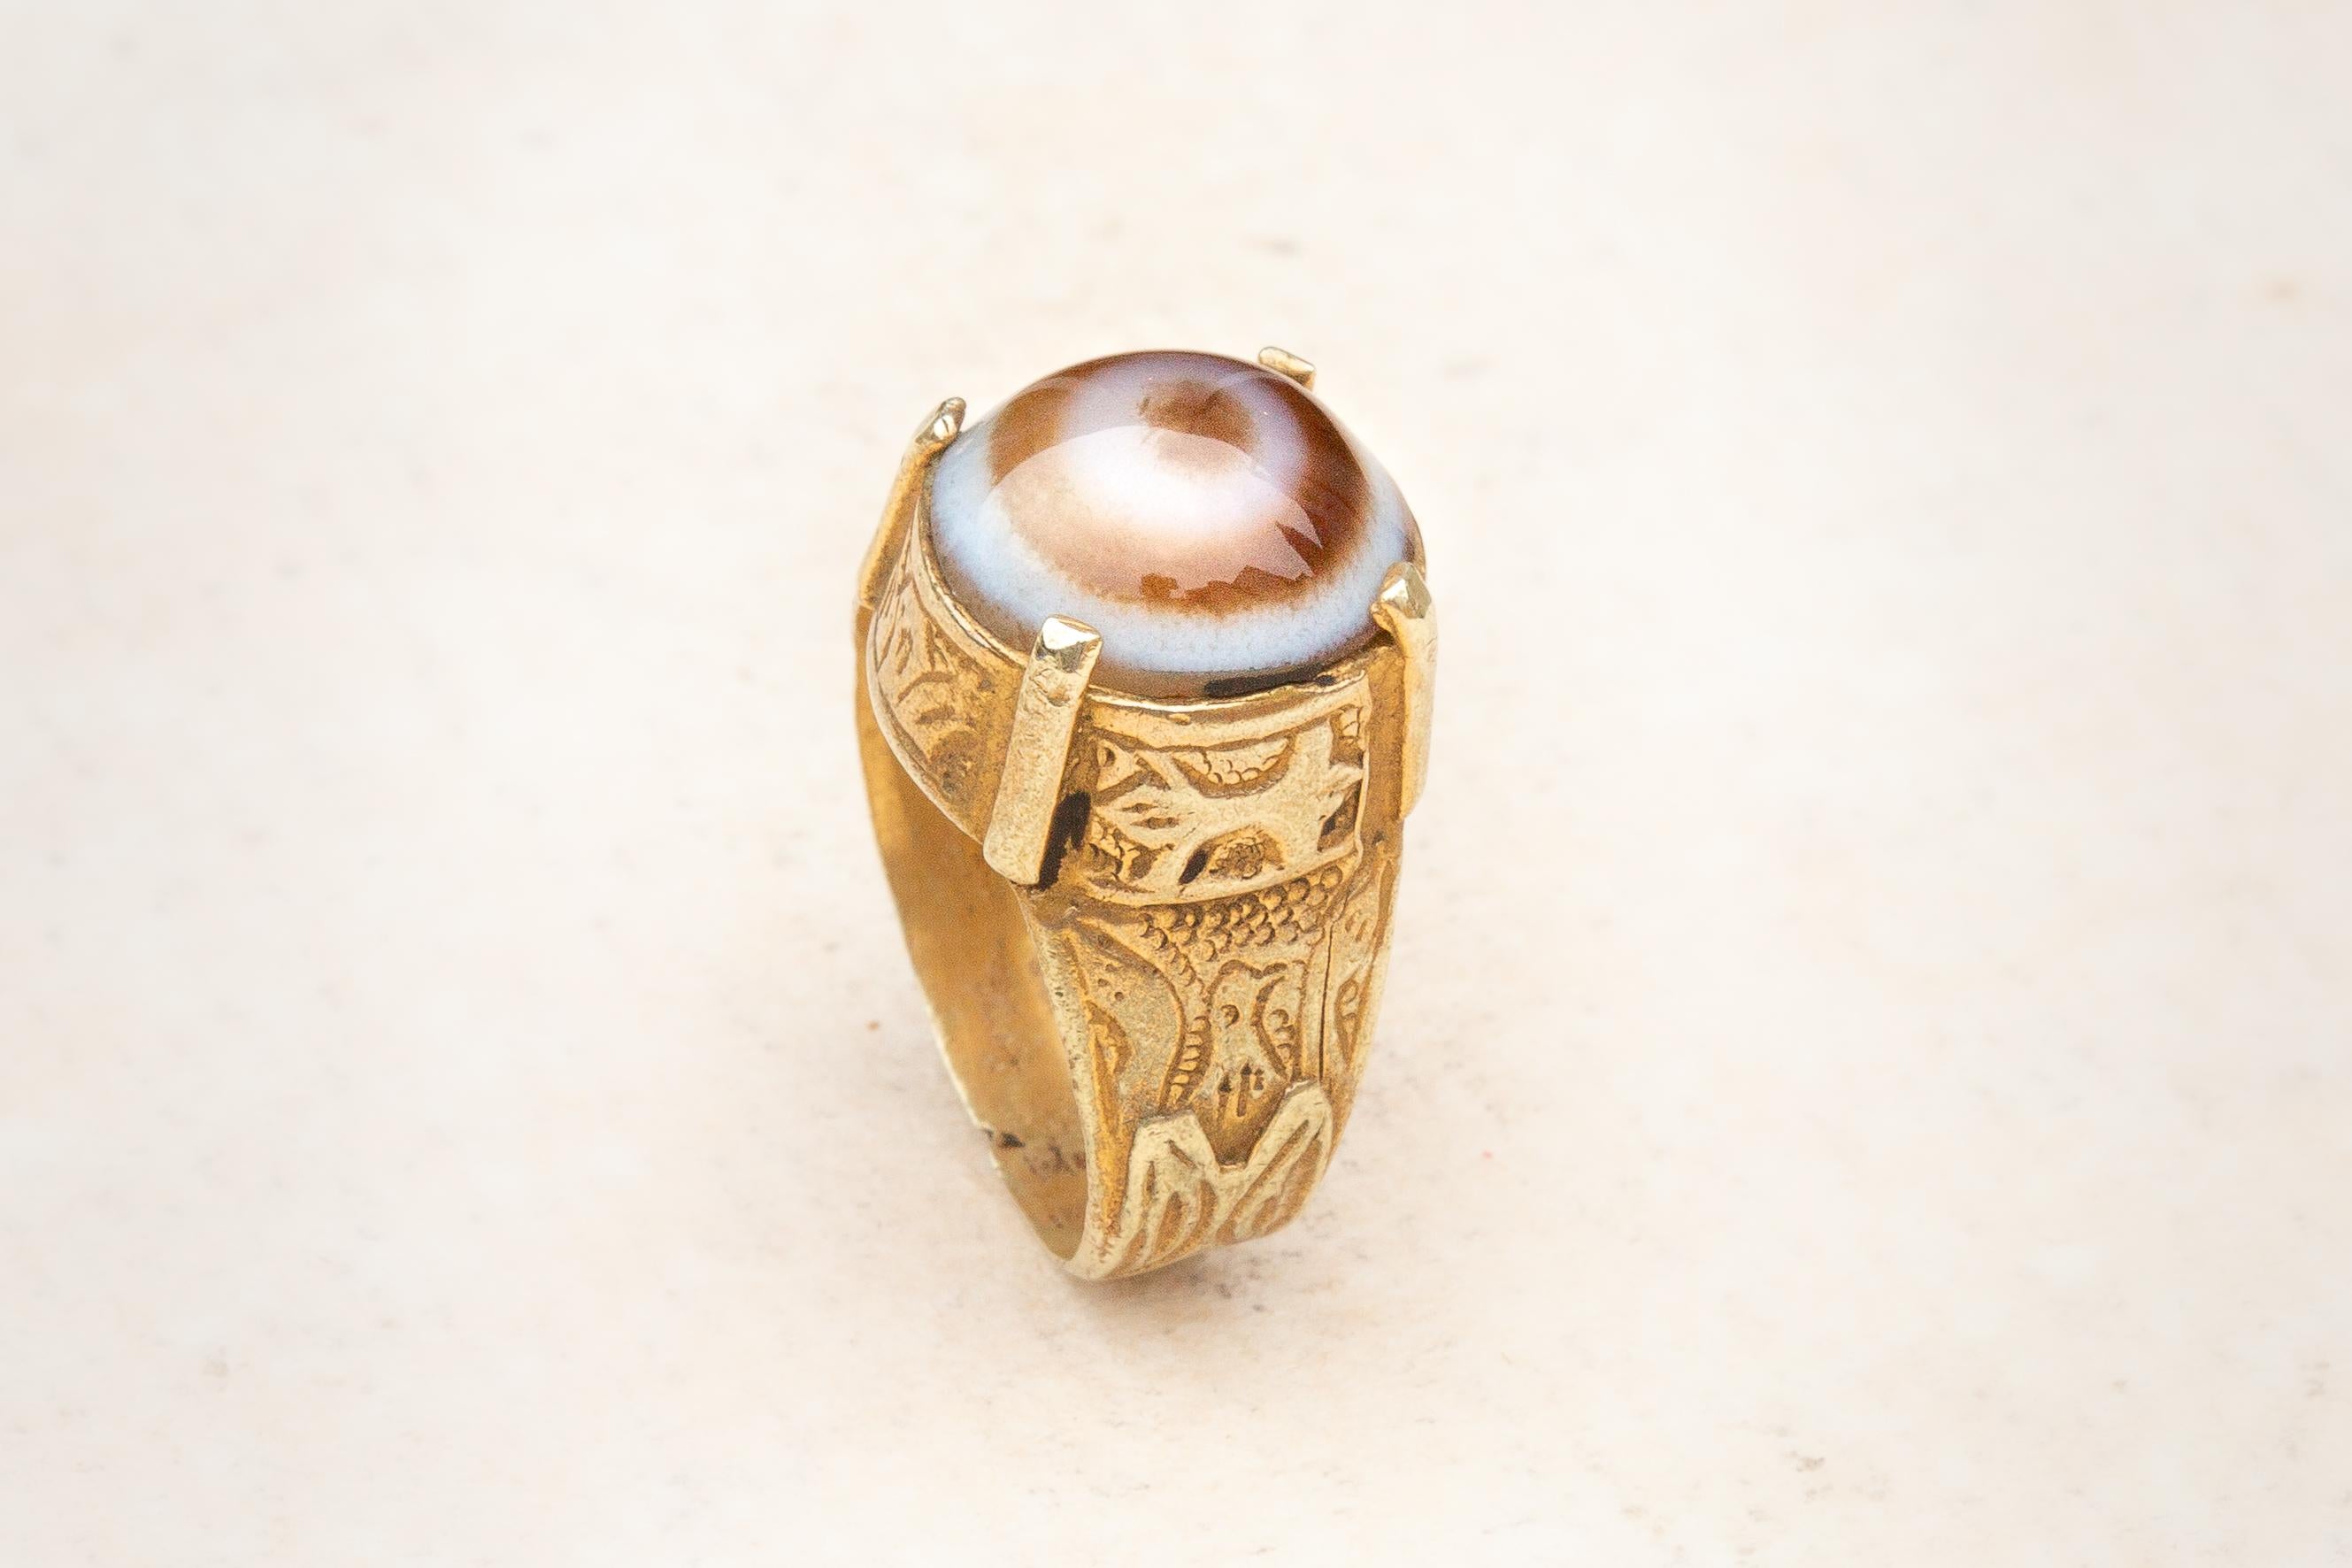 A superb Islamic gold and agate ring dating from the 13th to 14th century. The brown ‘sheep’s eye’ agate cabochon sits within a truncated conical bezel with a four-pronged setting soldered to the outside, typical of Seljuk dynasty rings. In the